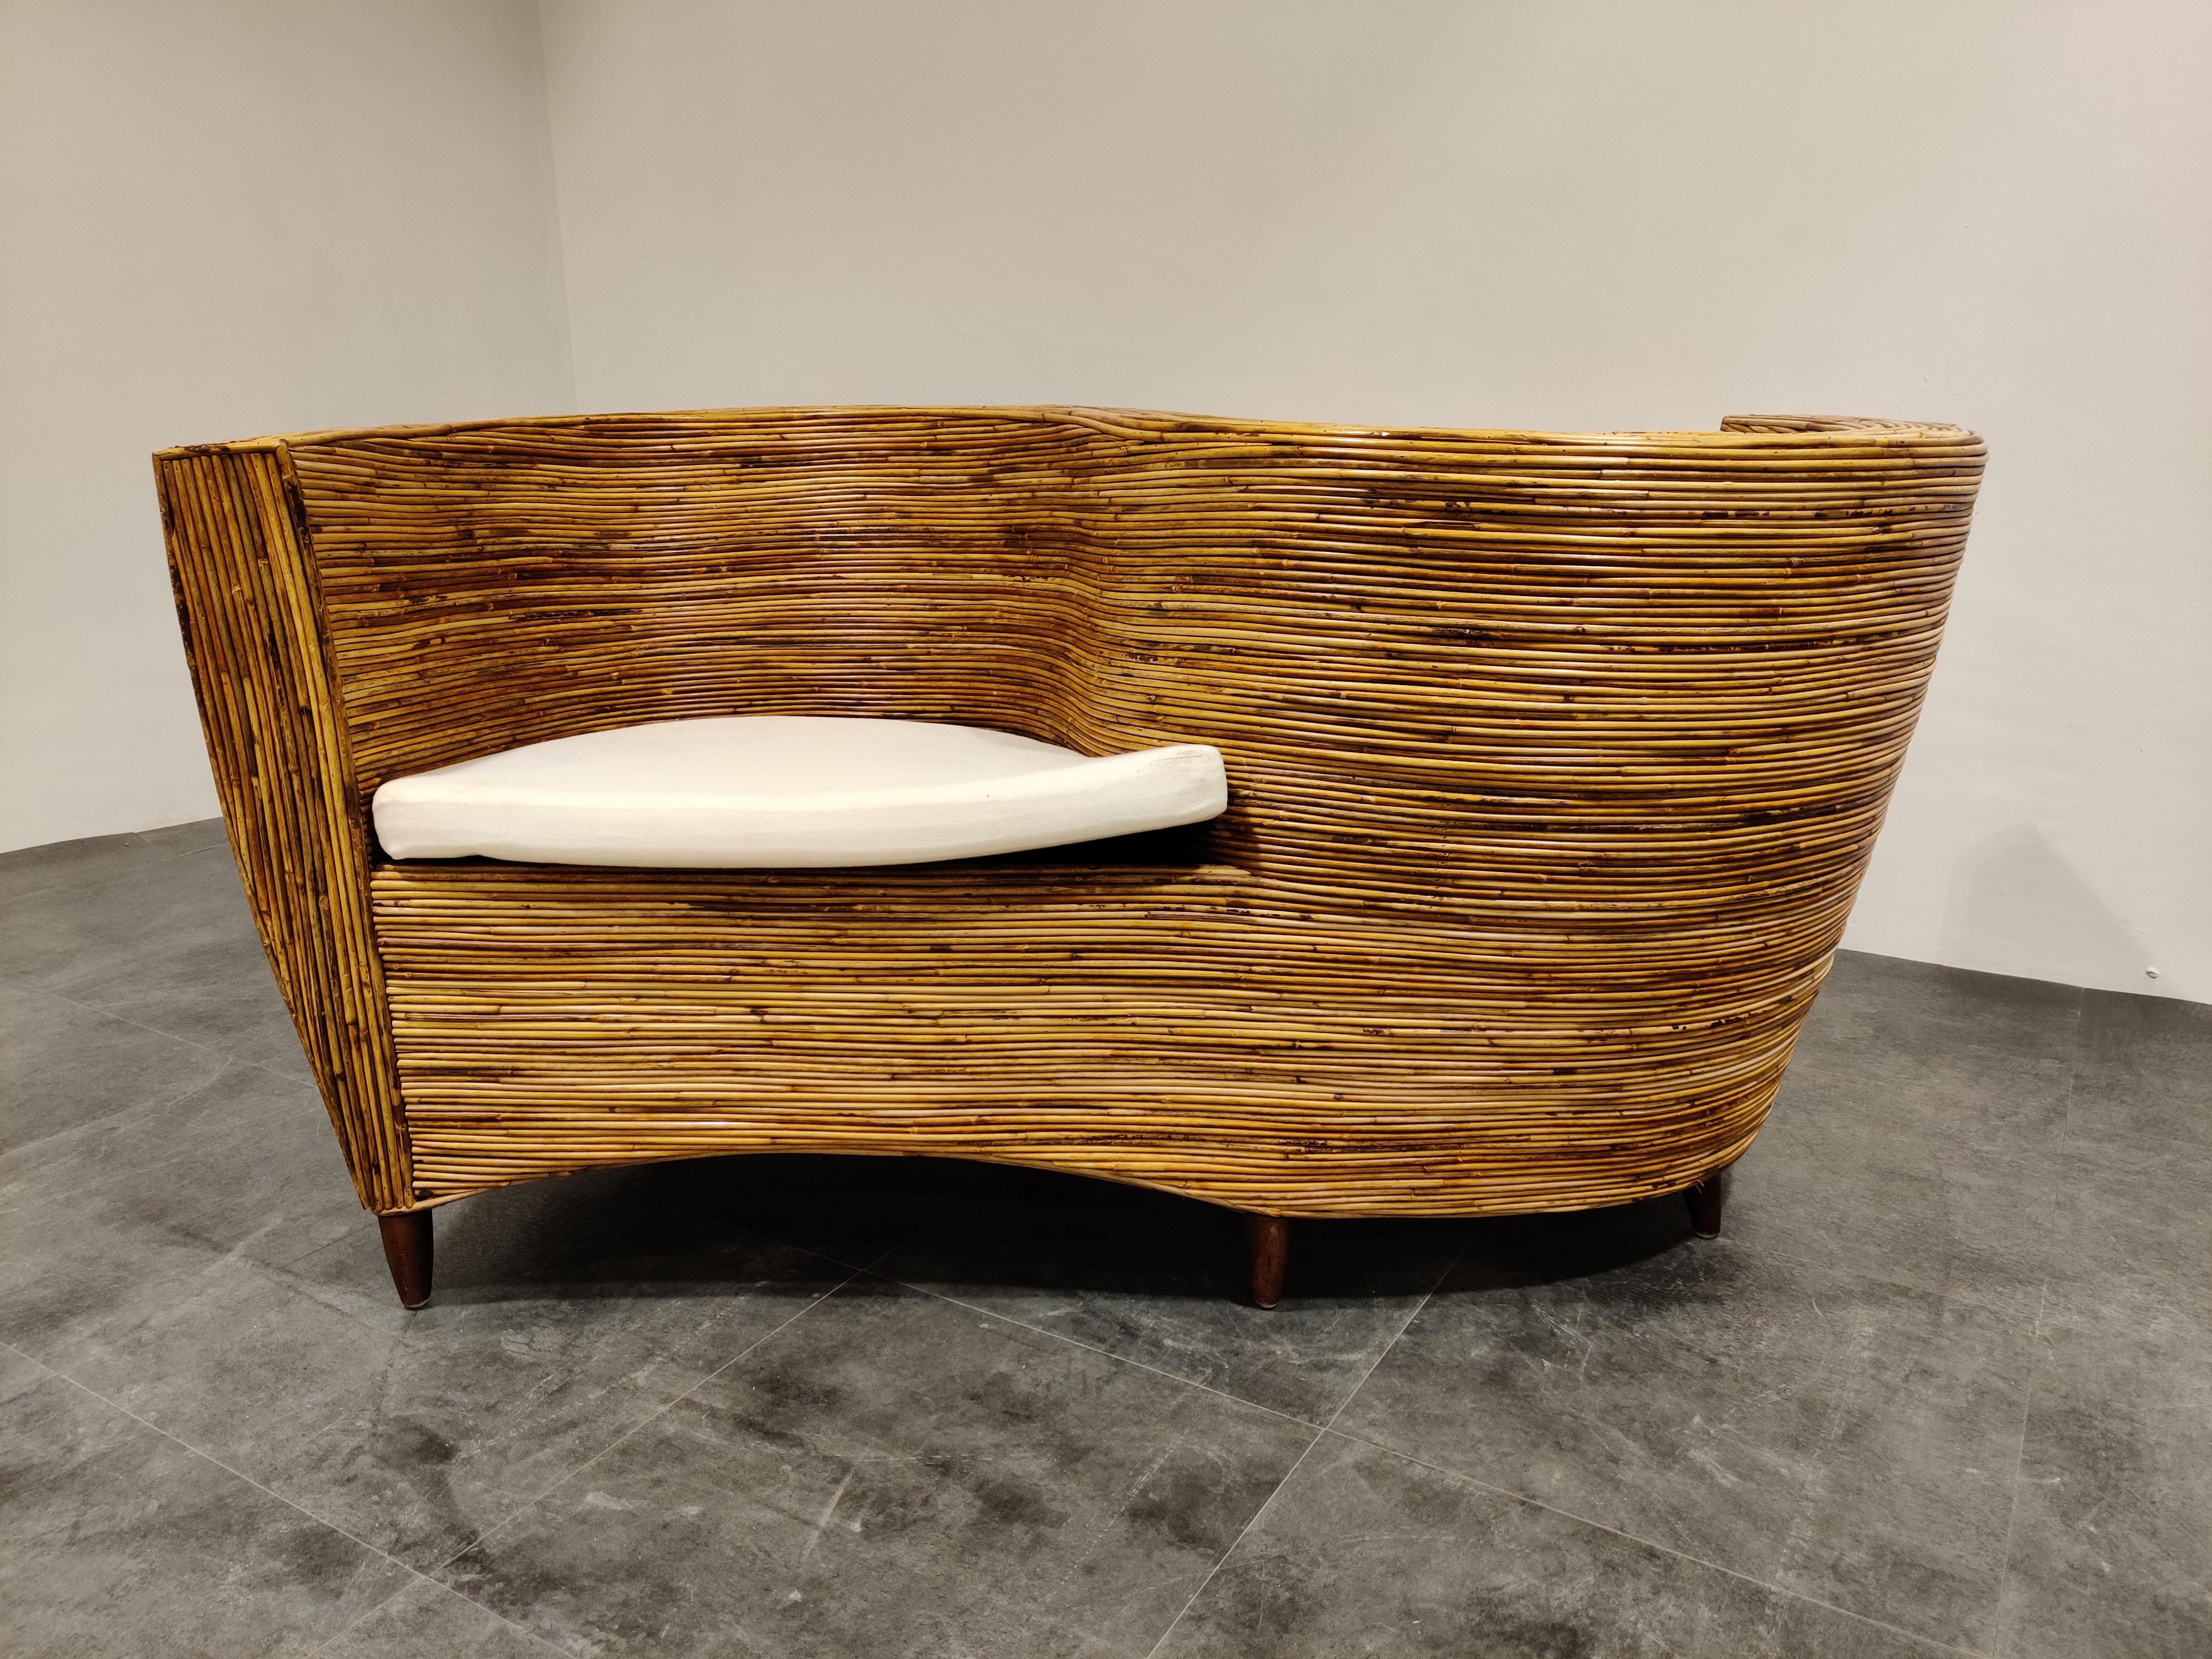 Amazing serpentine design rattan sofa/conversation chair by Vivai Del Sud

A lot of craftmanship went into making this chair and it looks fabulous. 

It looks timeless and combines with a lot of interiors. Great piece for in a patio as